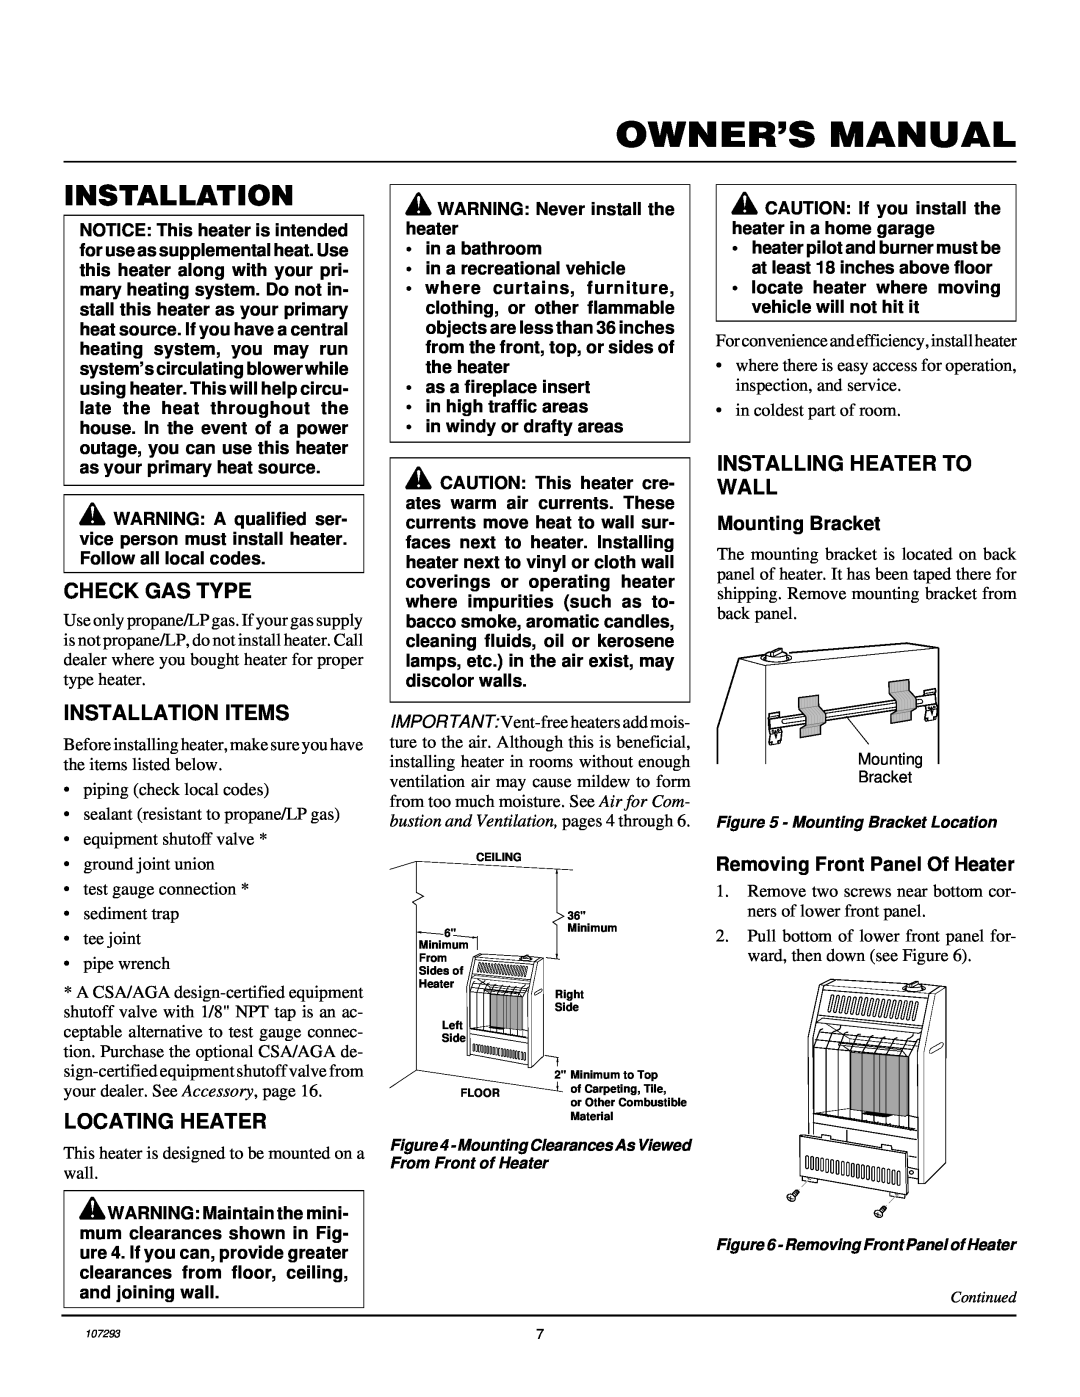 Desa CGR2P installation manual Check Gas Type, Installation Items, Installing Heater To Wall, Locating Heater 